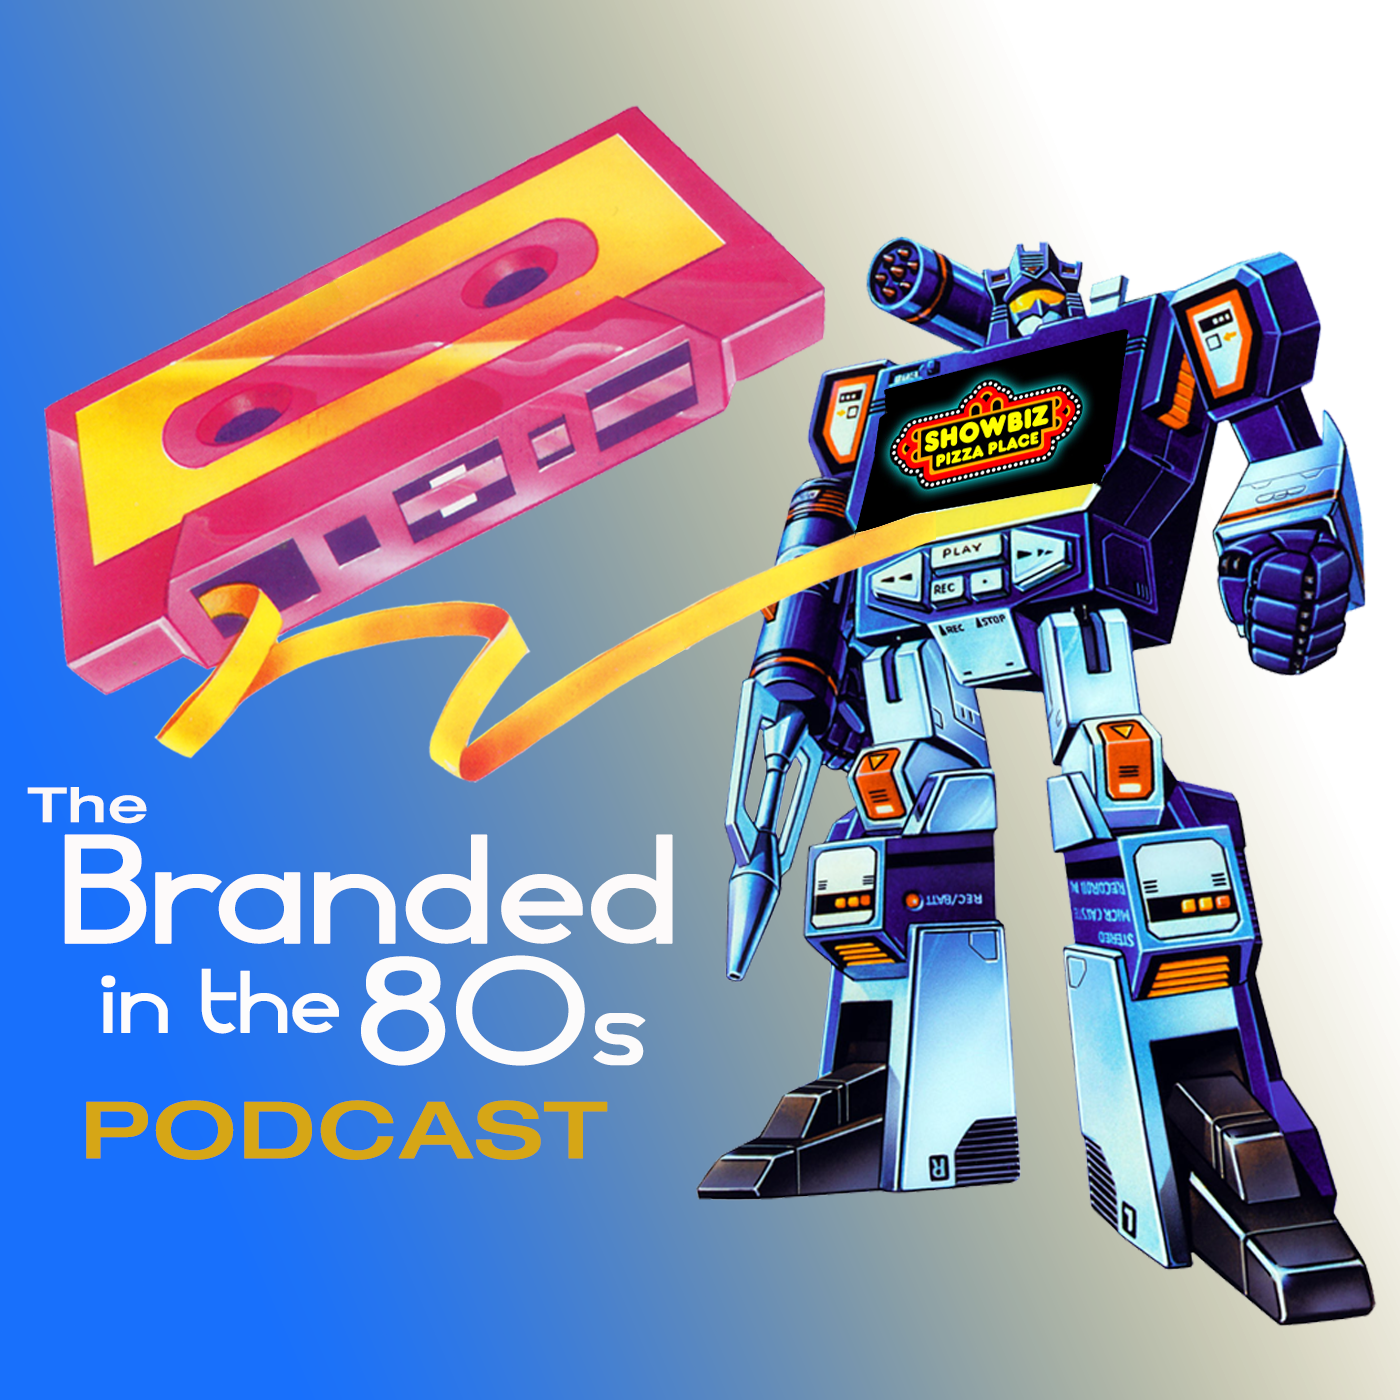 All New Branded in the 80s Podcast, Episode 8!